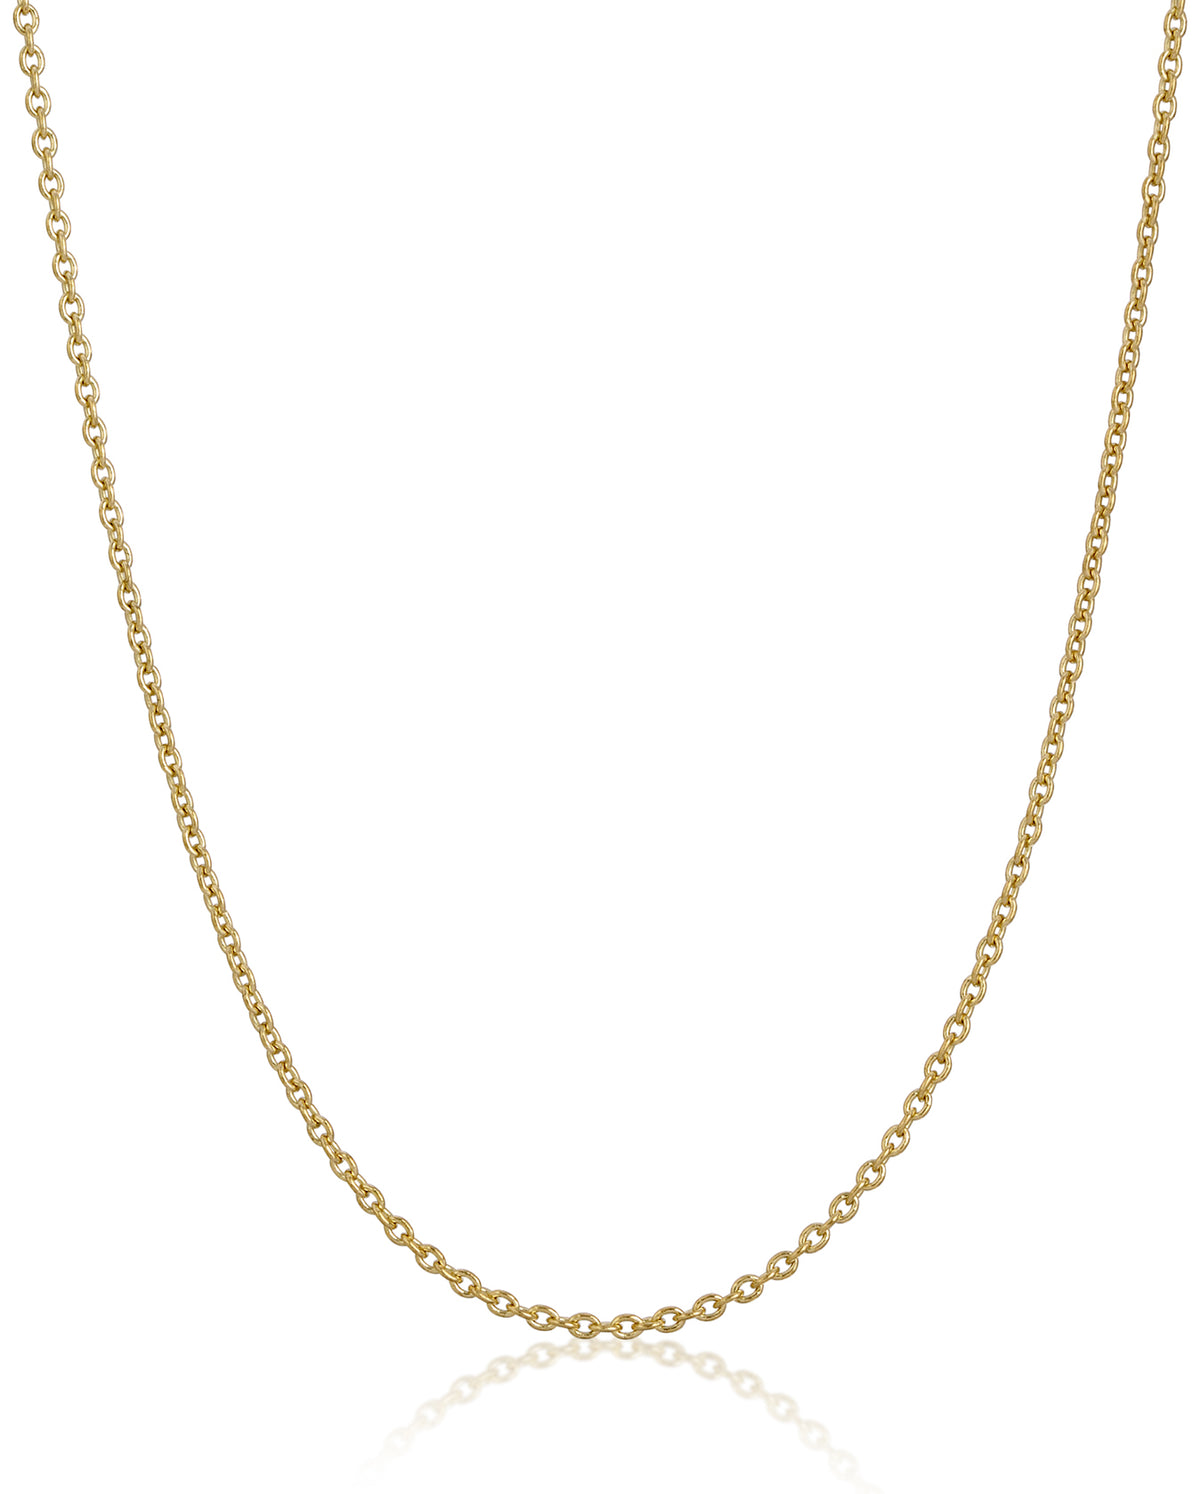 14K Gold Cable Chain Necklace - 18"